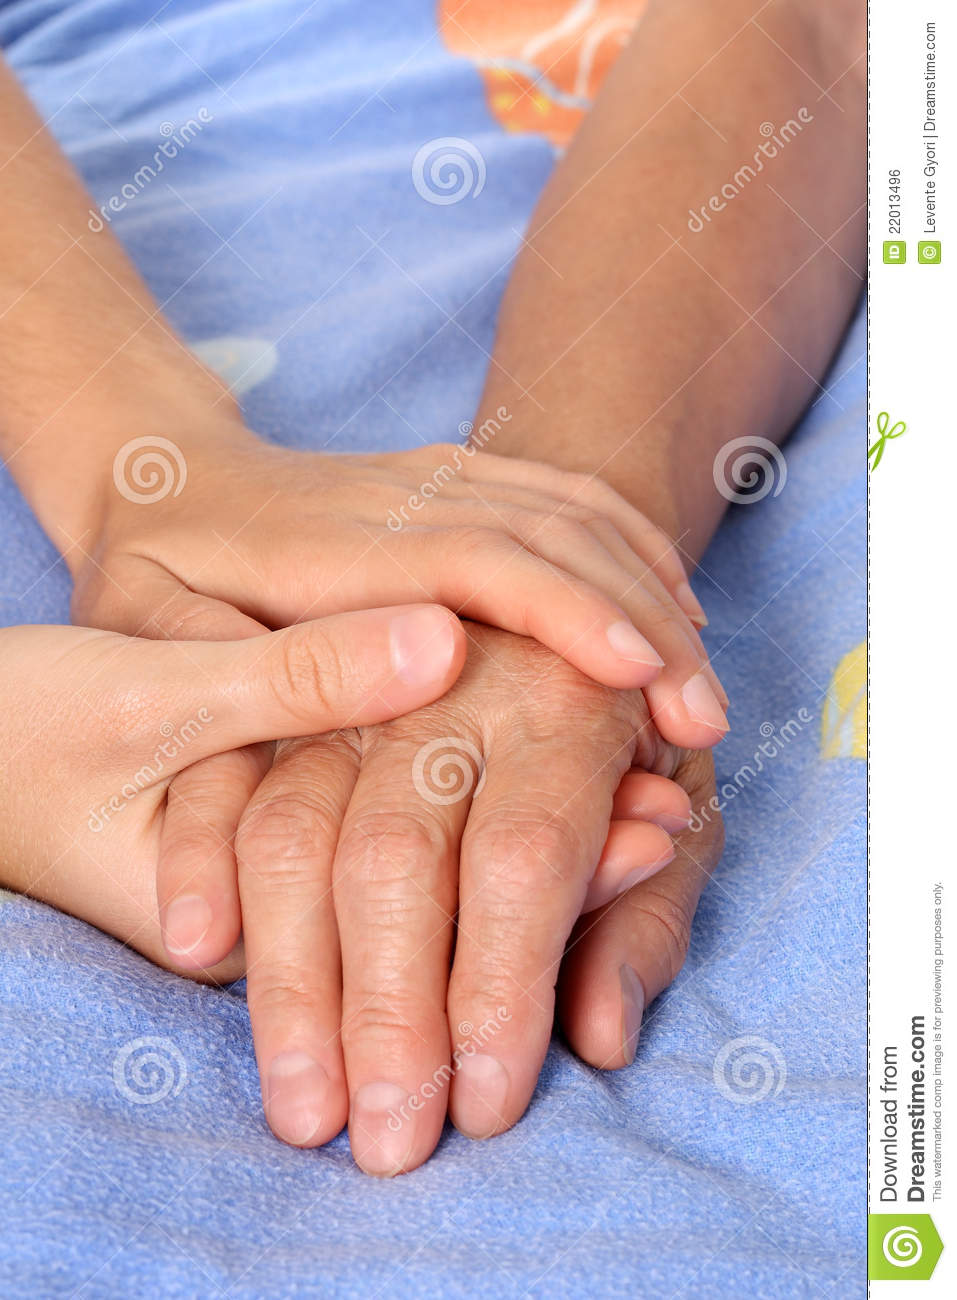 Helping The Senior Holding Patient Hand Royalty Free Stock Image    